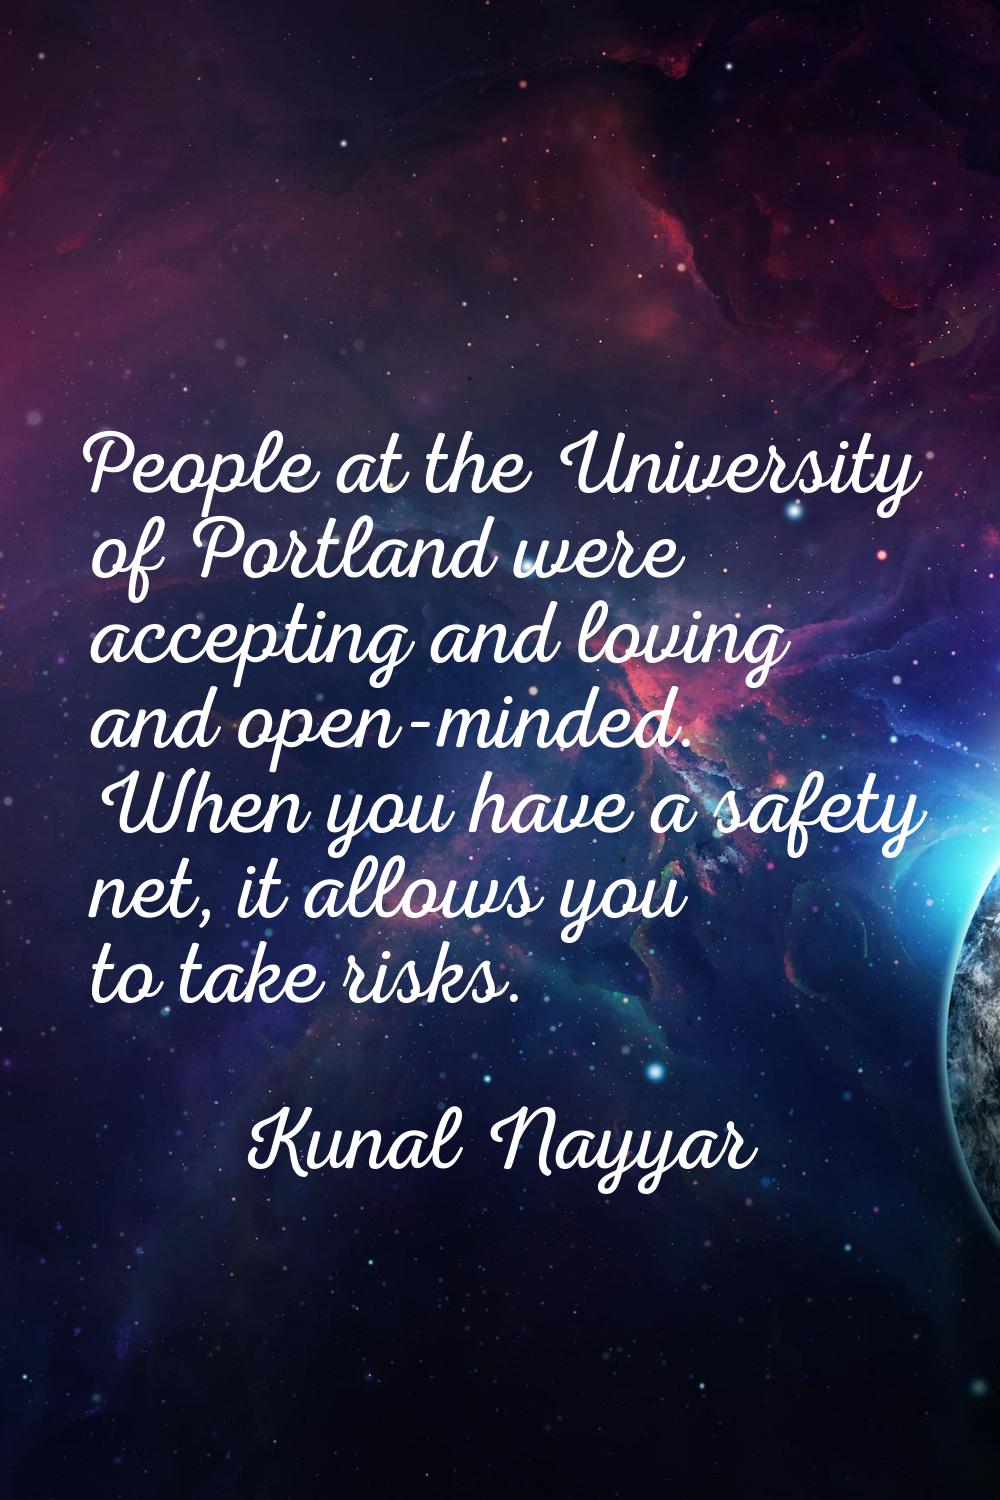 People at the University of Portland were accepting and loving and open-minded. When you have a saf